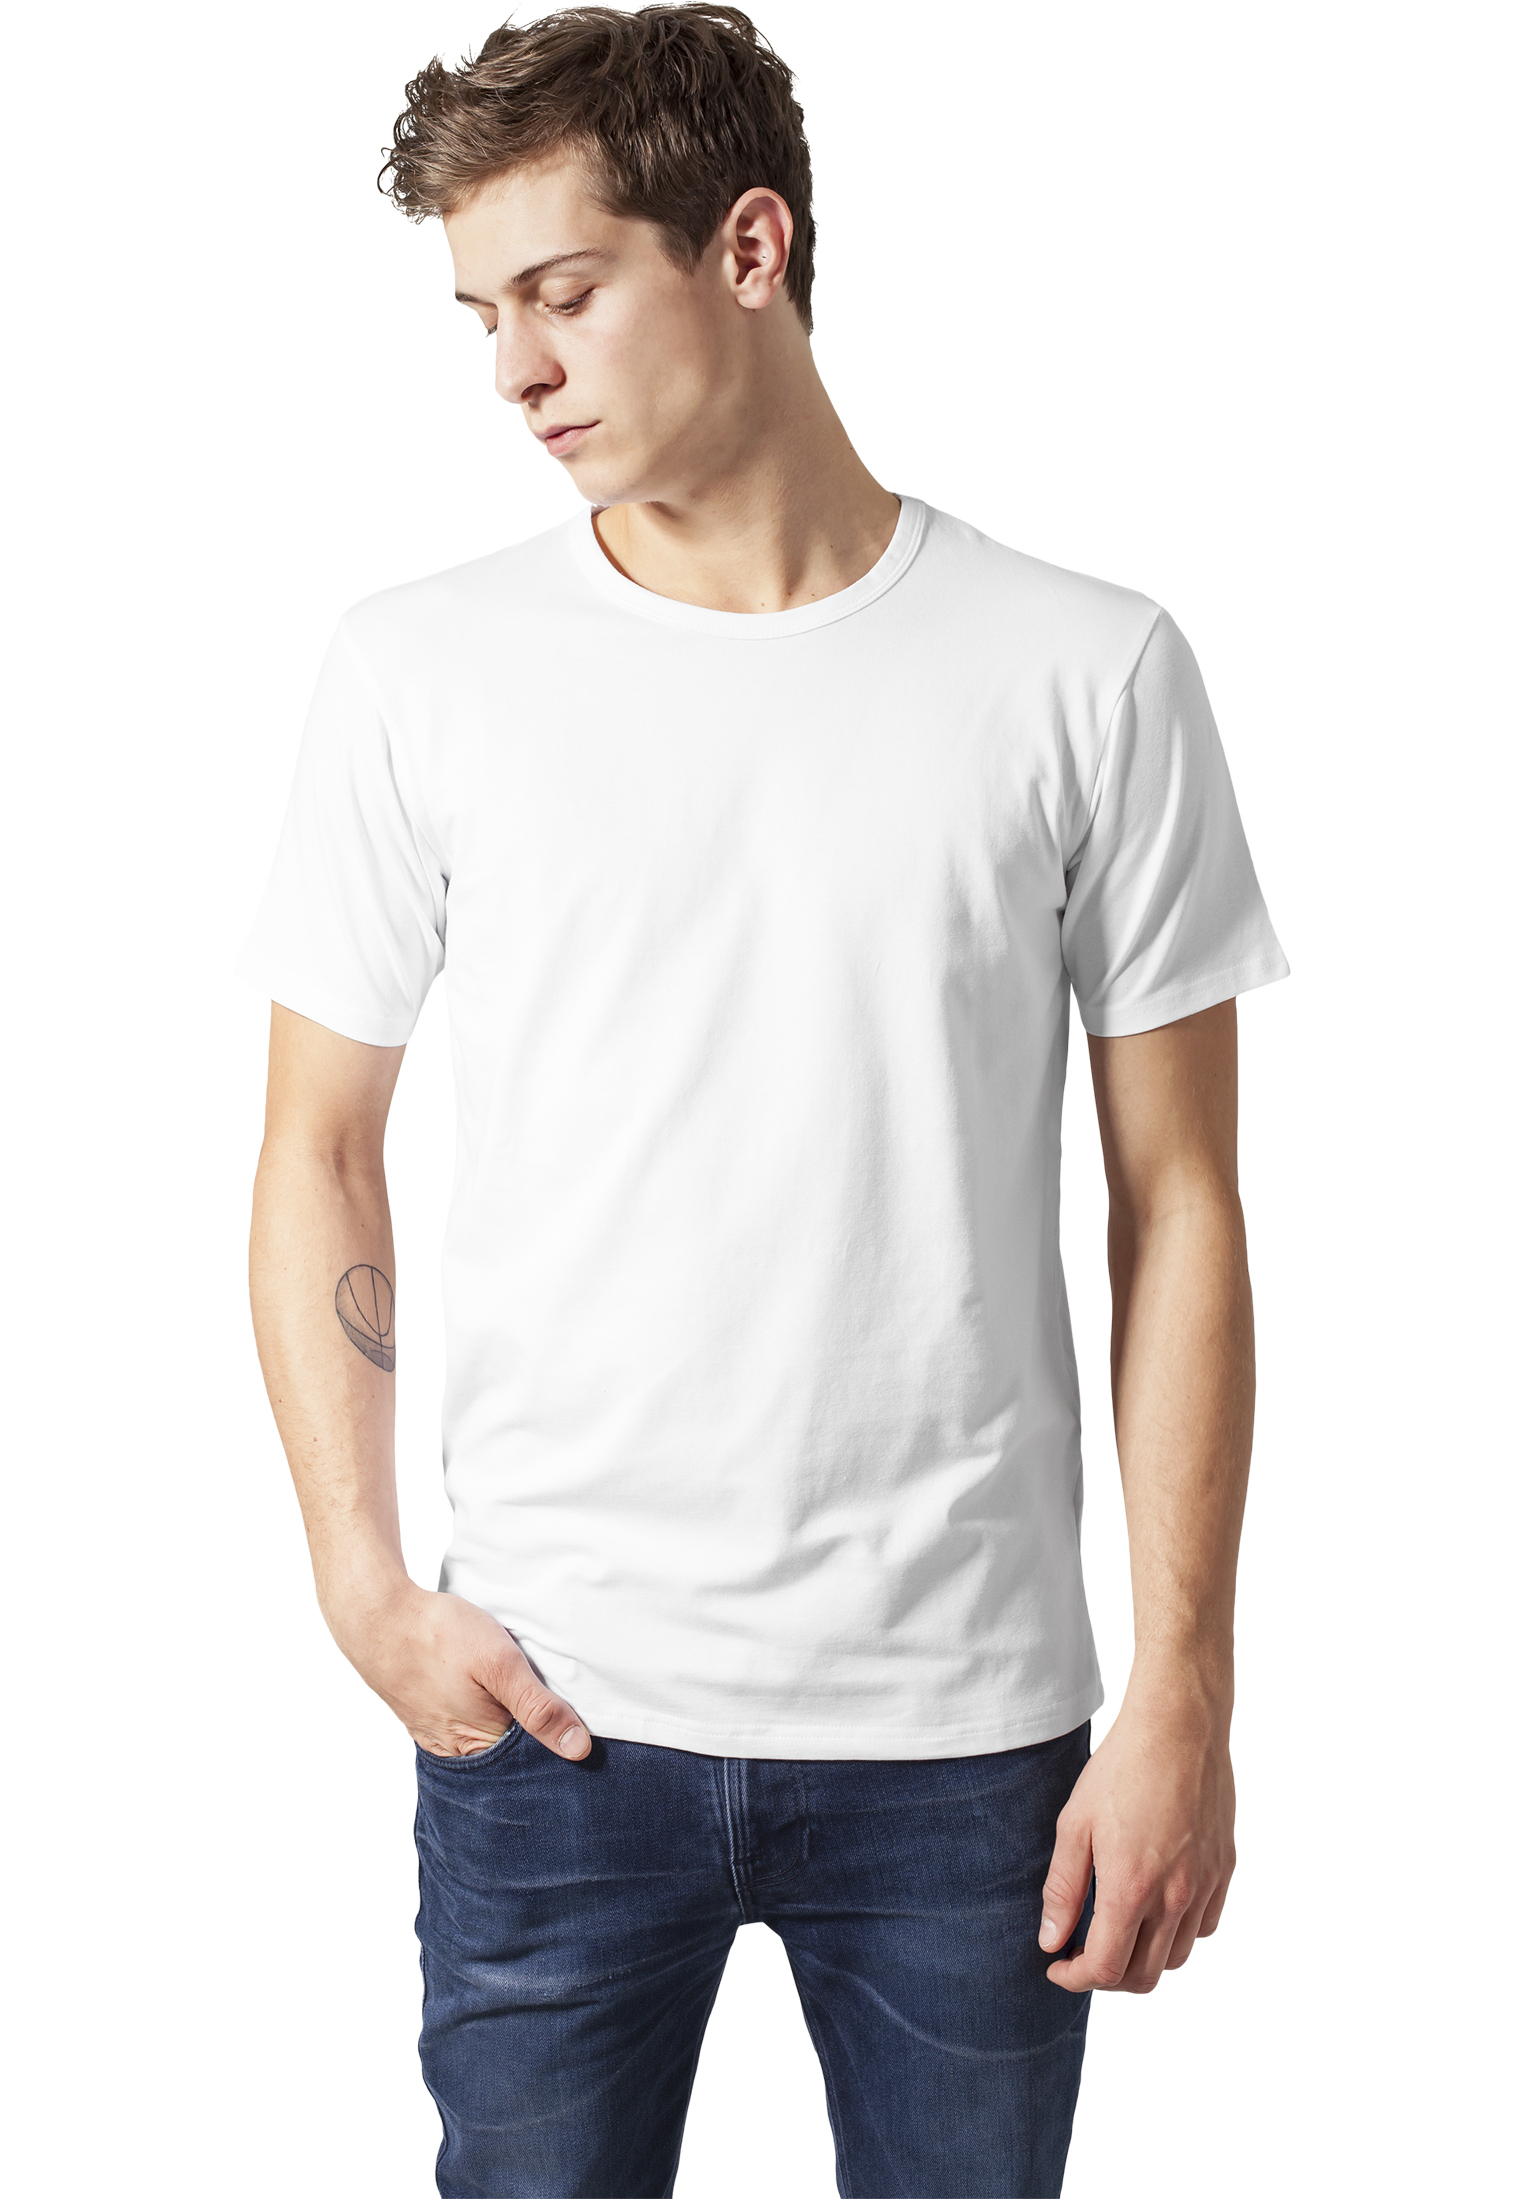 Buy Urban Classics 'Fitted Stretch' T-shirt - White